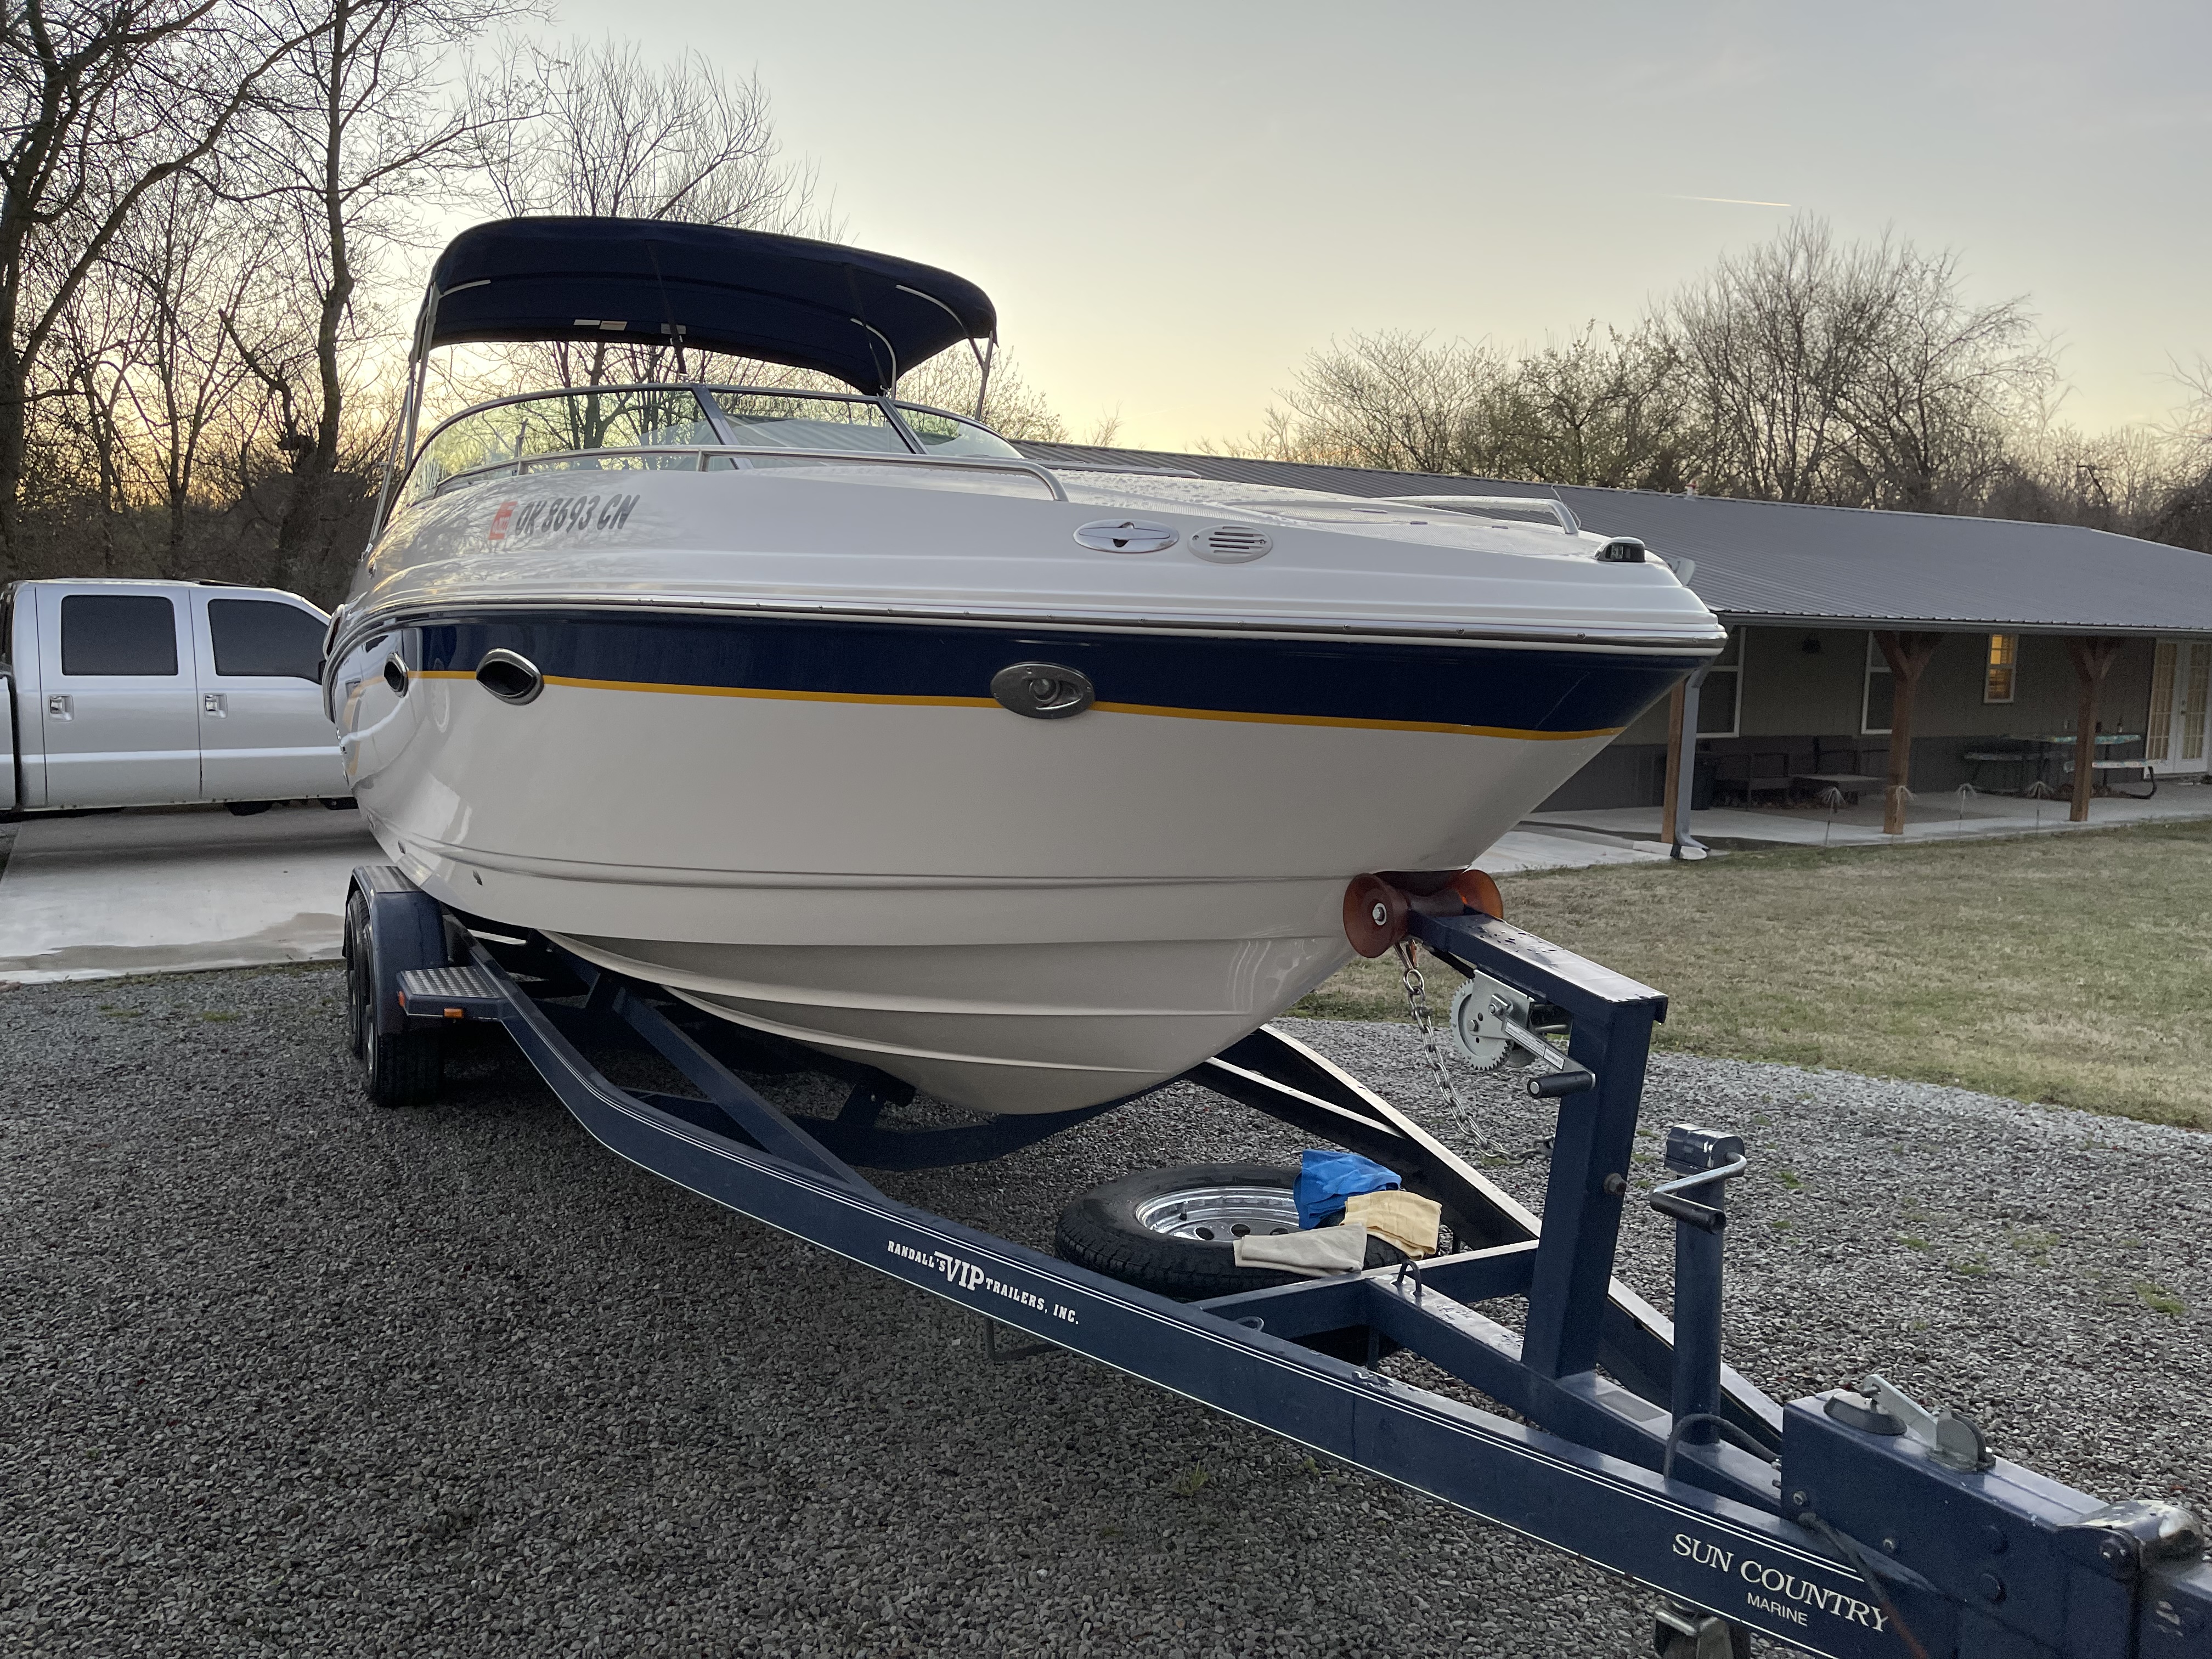 2003 Chaparral 265ssi Power boat for sale in Checotah, OK - image 7 